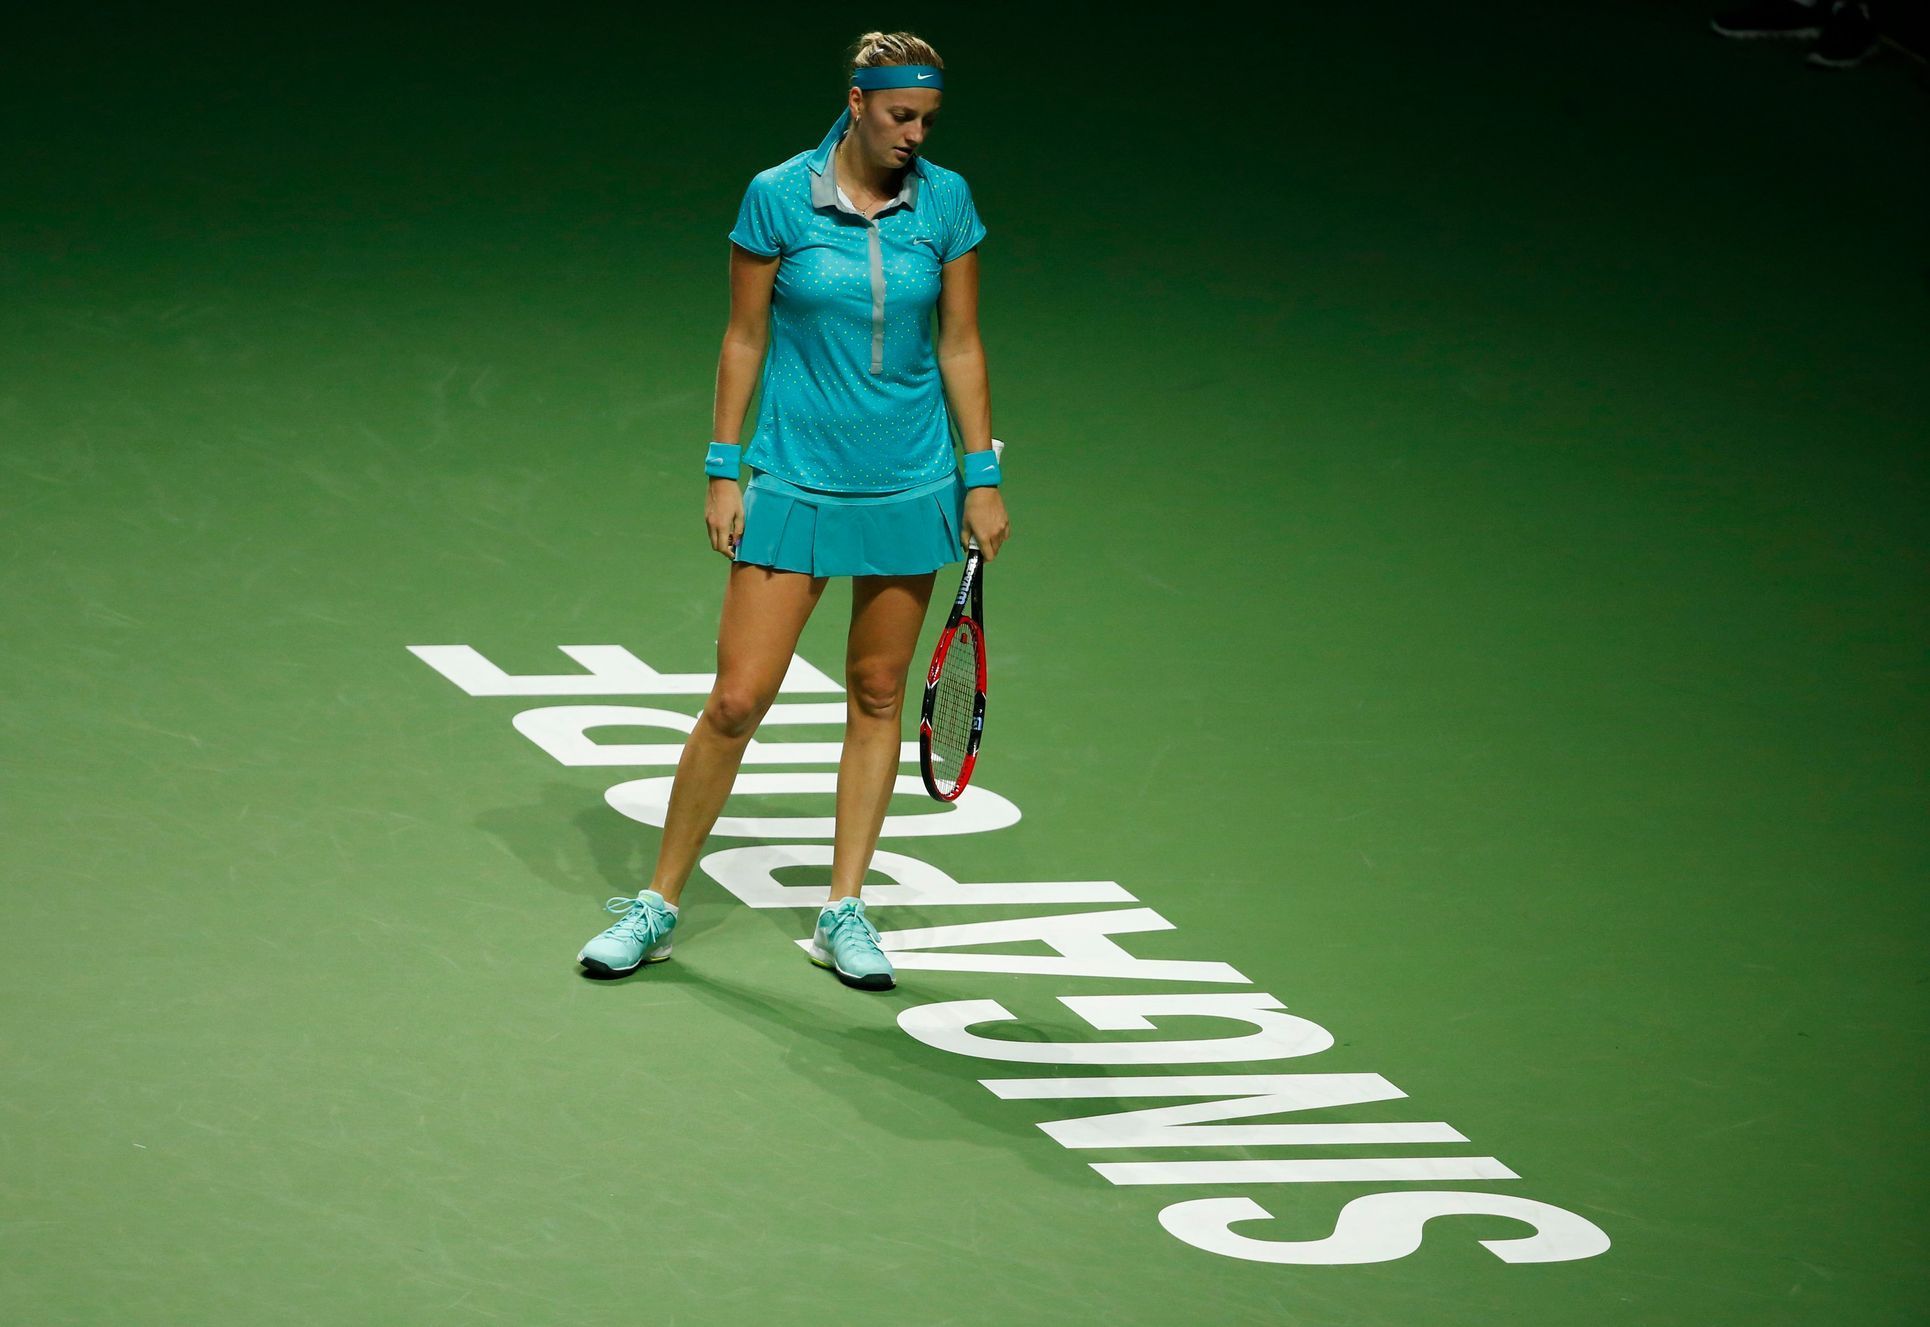 Kvitova of the Czech Republic reacts after losing a point against Radwanska of Poland during their WTA Finals singles tennis match at the Singapore Indoor Stadium